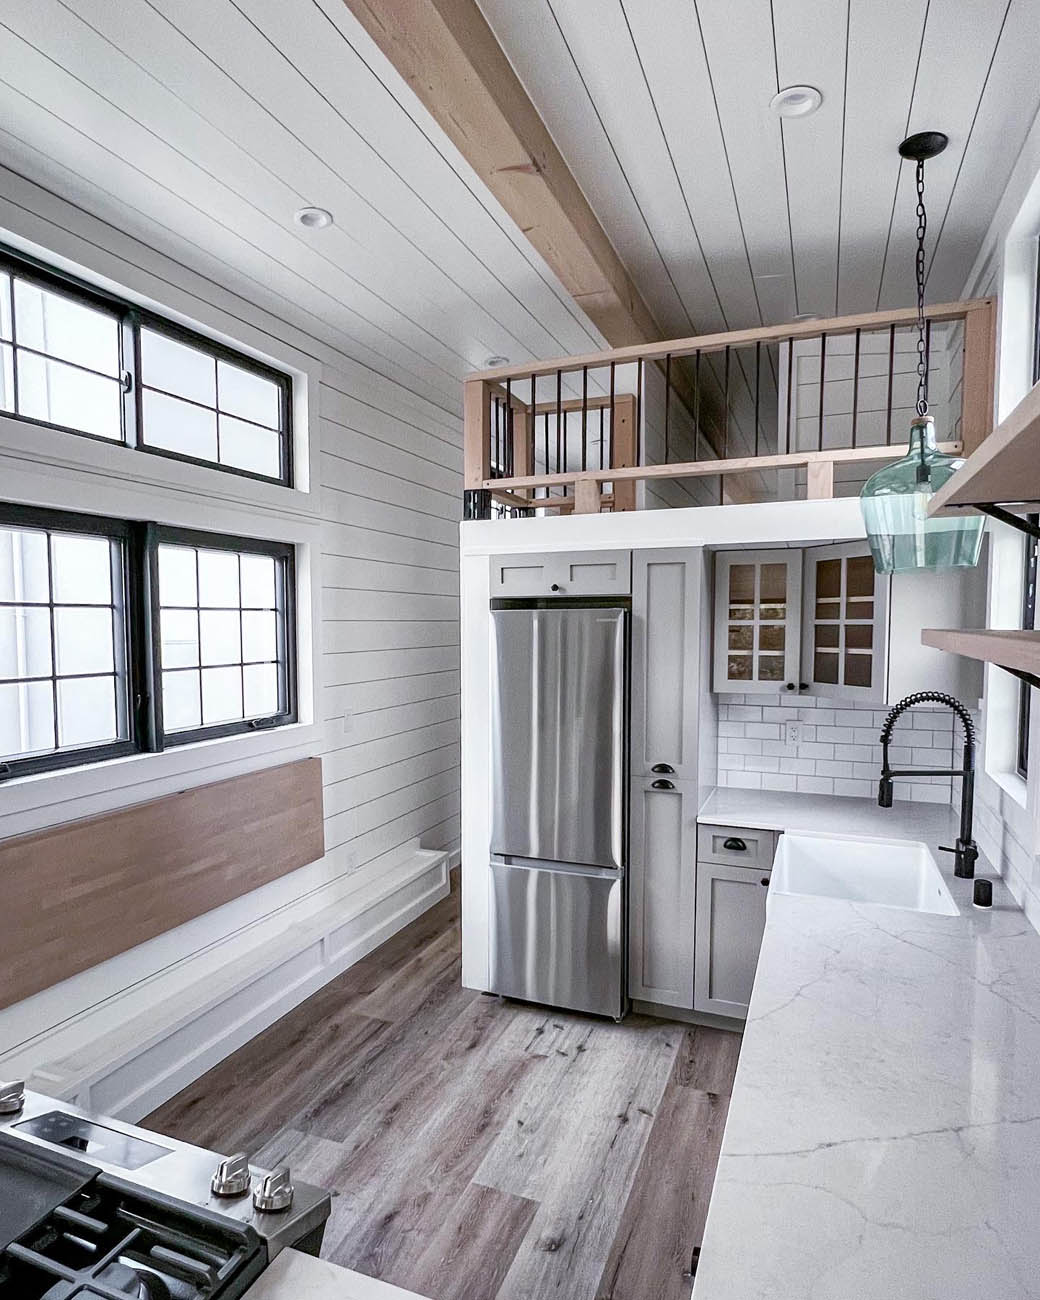 Inside a tiny ADU kitchen with a bedding loft, provided by Anchored Tiny Homes custom small home builder in Indianapolis.